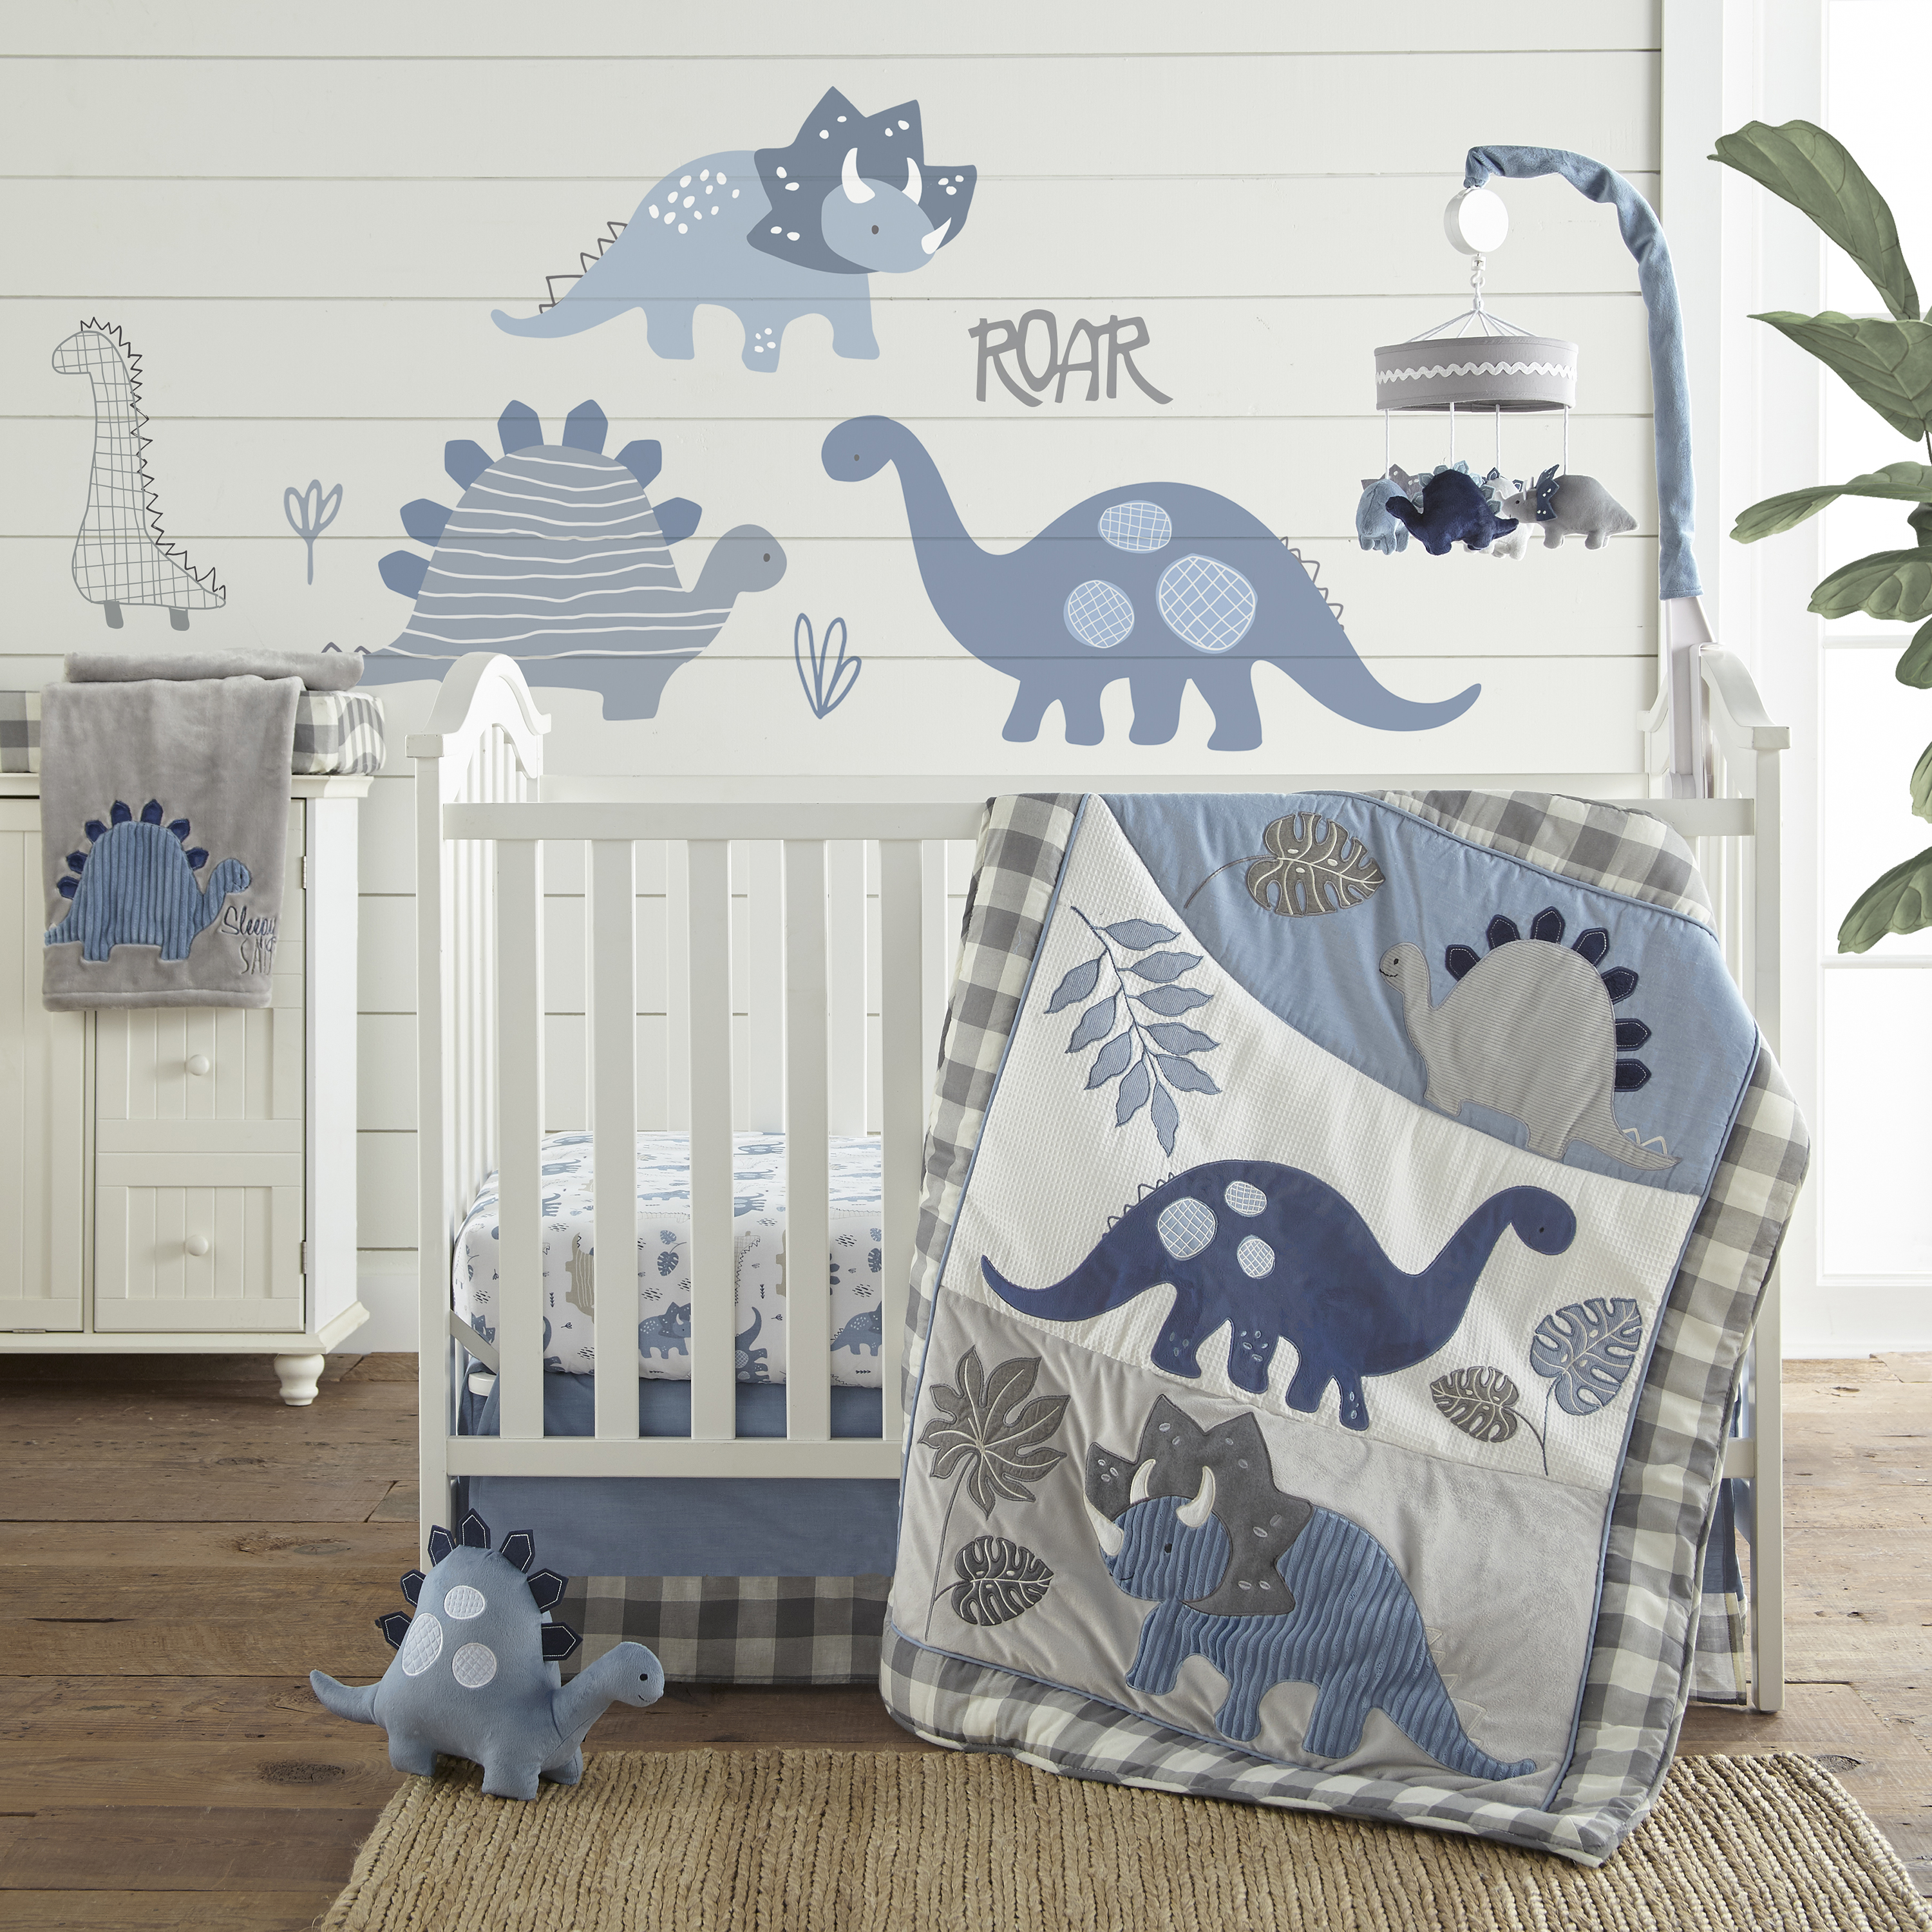 Levtex Baby - Kipton Crib Bed Set - Baby Nursery Set - Grey, White and Blue - Dinosaurs and Leaves - 4 Piece Set Includes Quilt, Fitted Sheet, Wall Decal & Skirt/Dust Ruffle - image 1 of 6